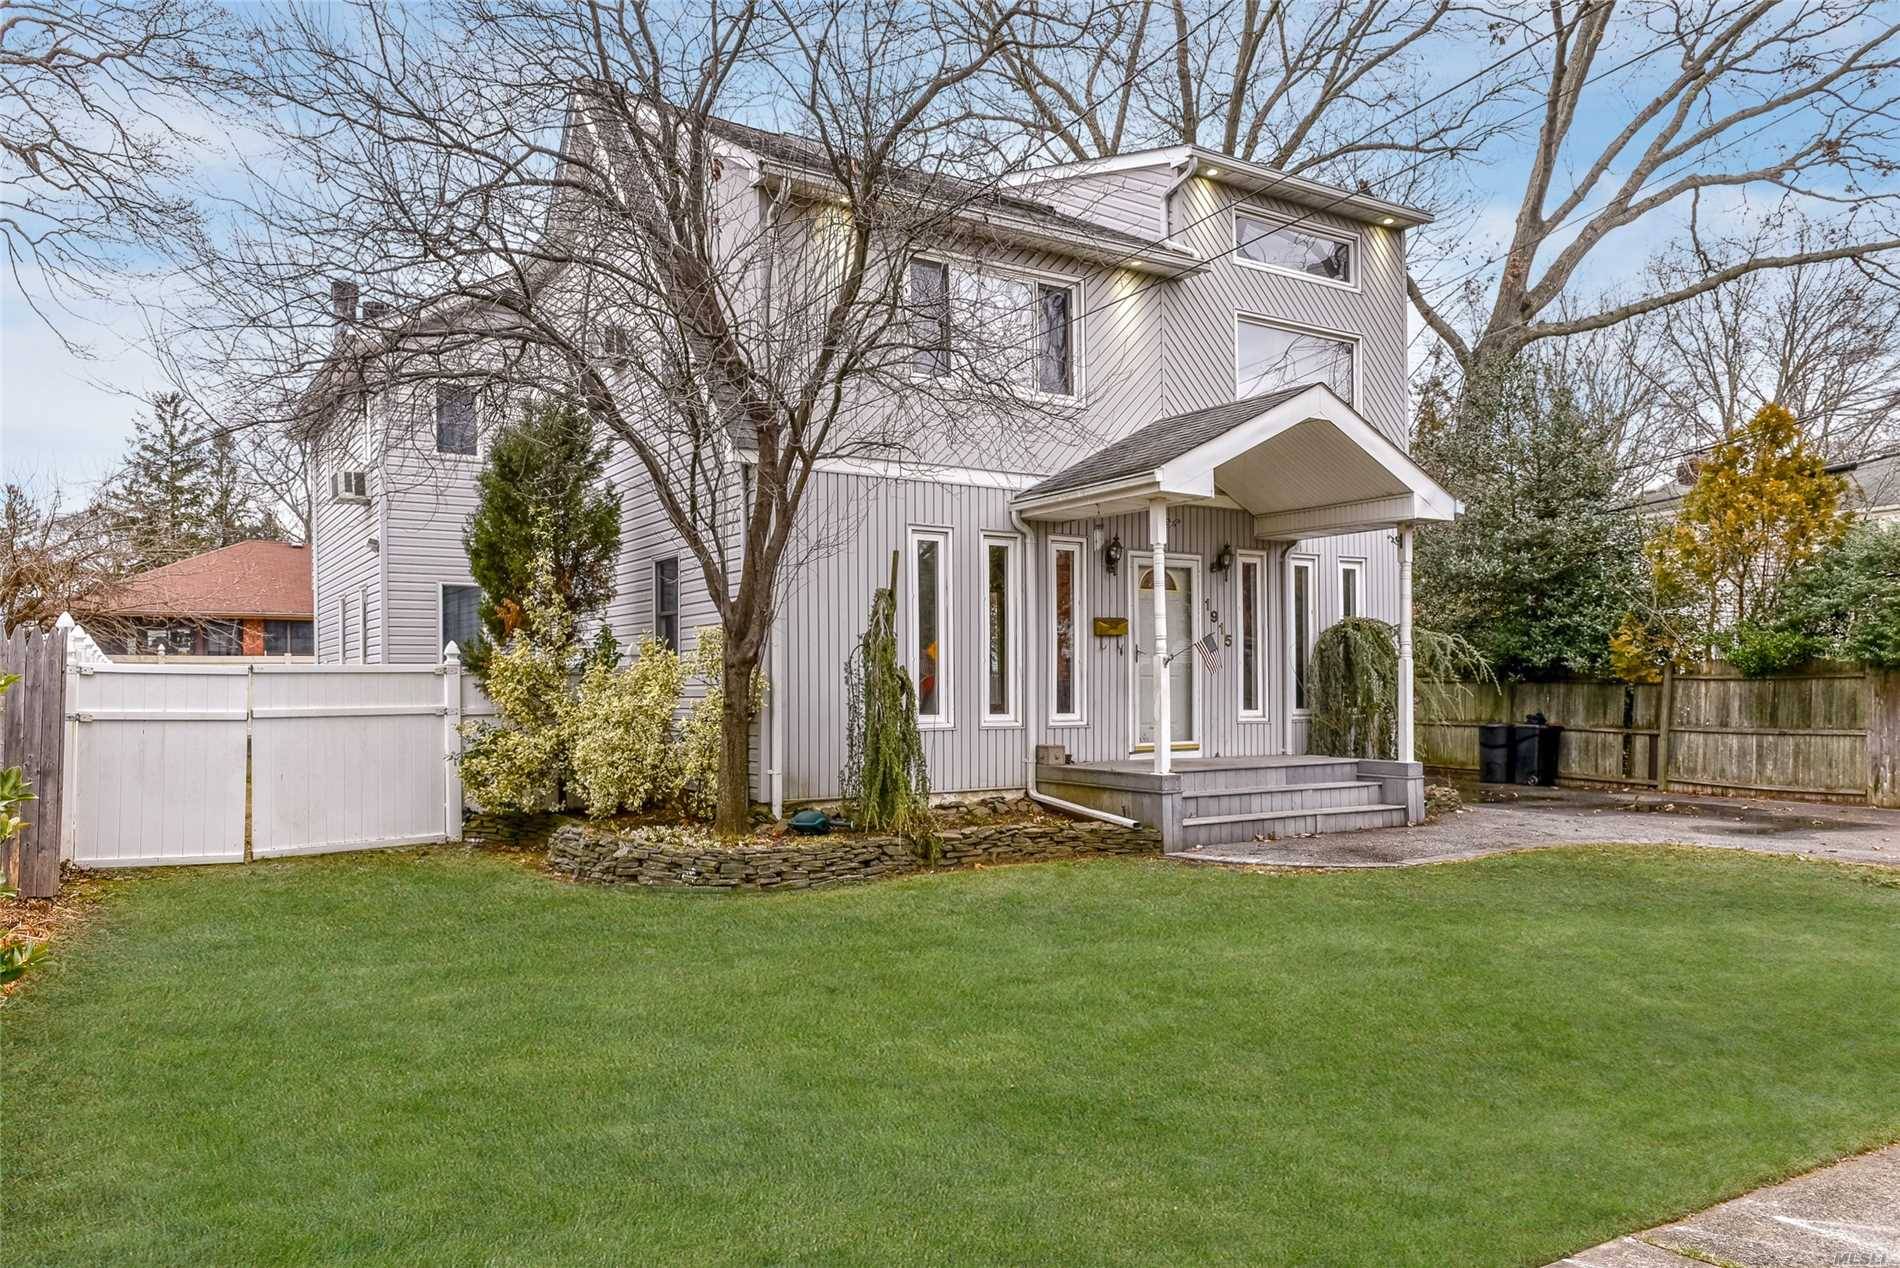 One Of A Kind Oversized Colonial 2800 Sq Ft On A Dead End Street, This Home Offers Stunning Fireplace To Enjoy In A Great Size Family Room, Hard Wood Floors, ...